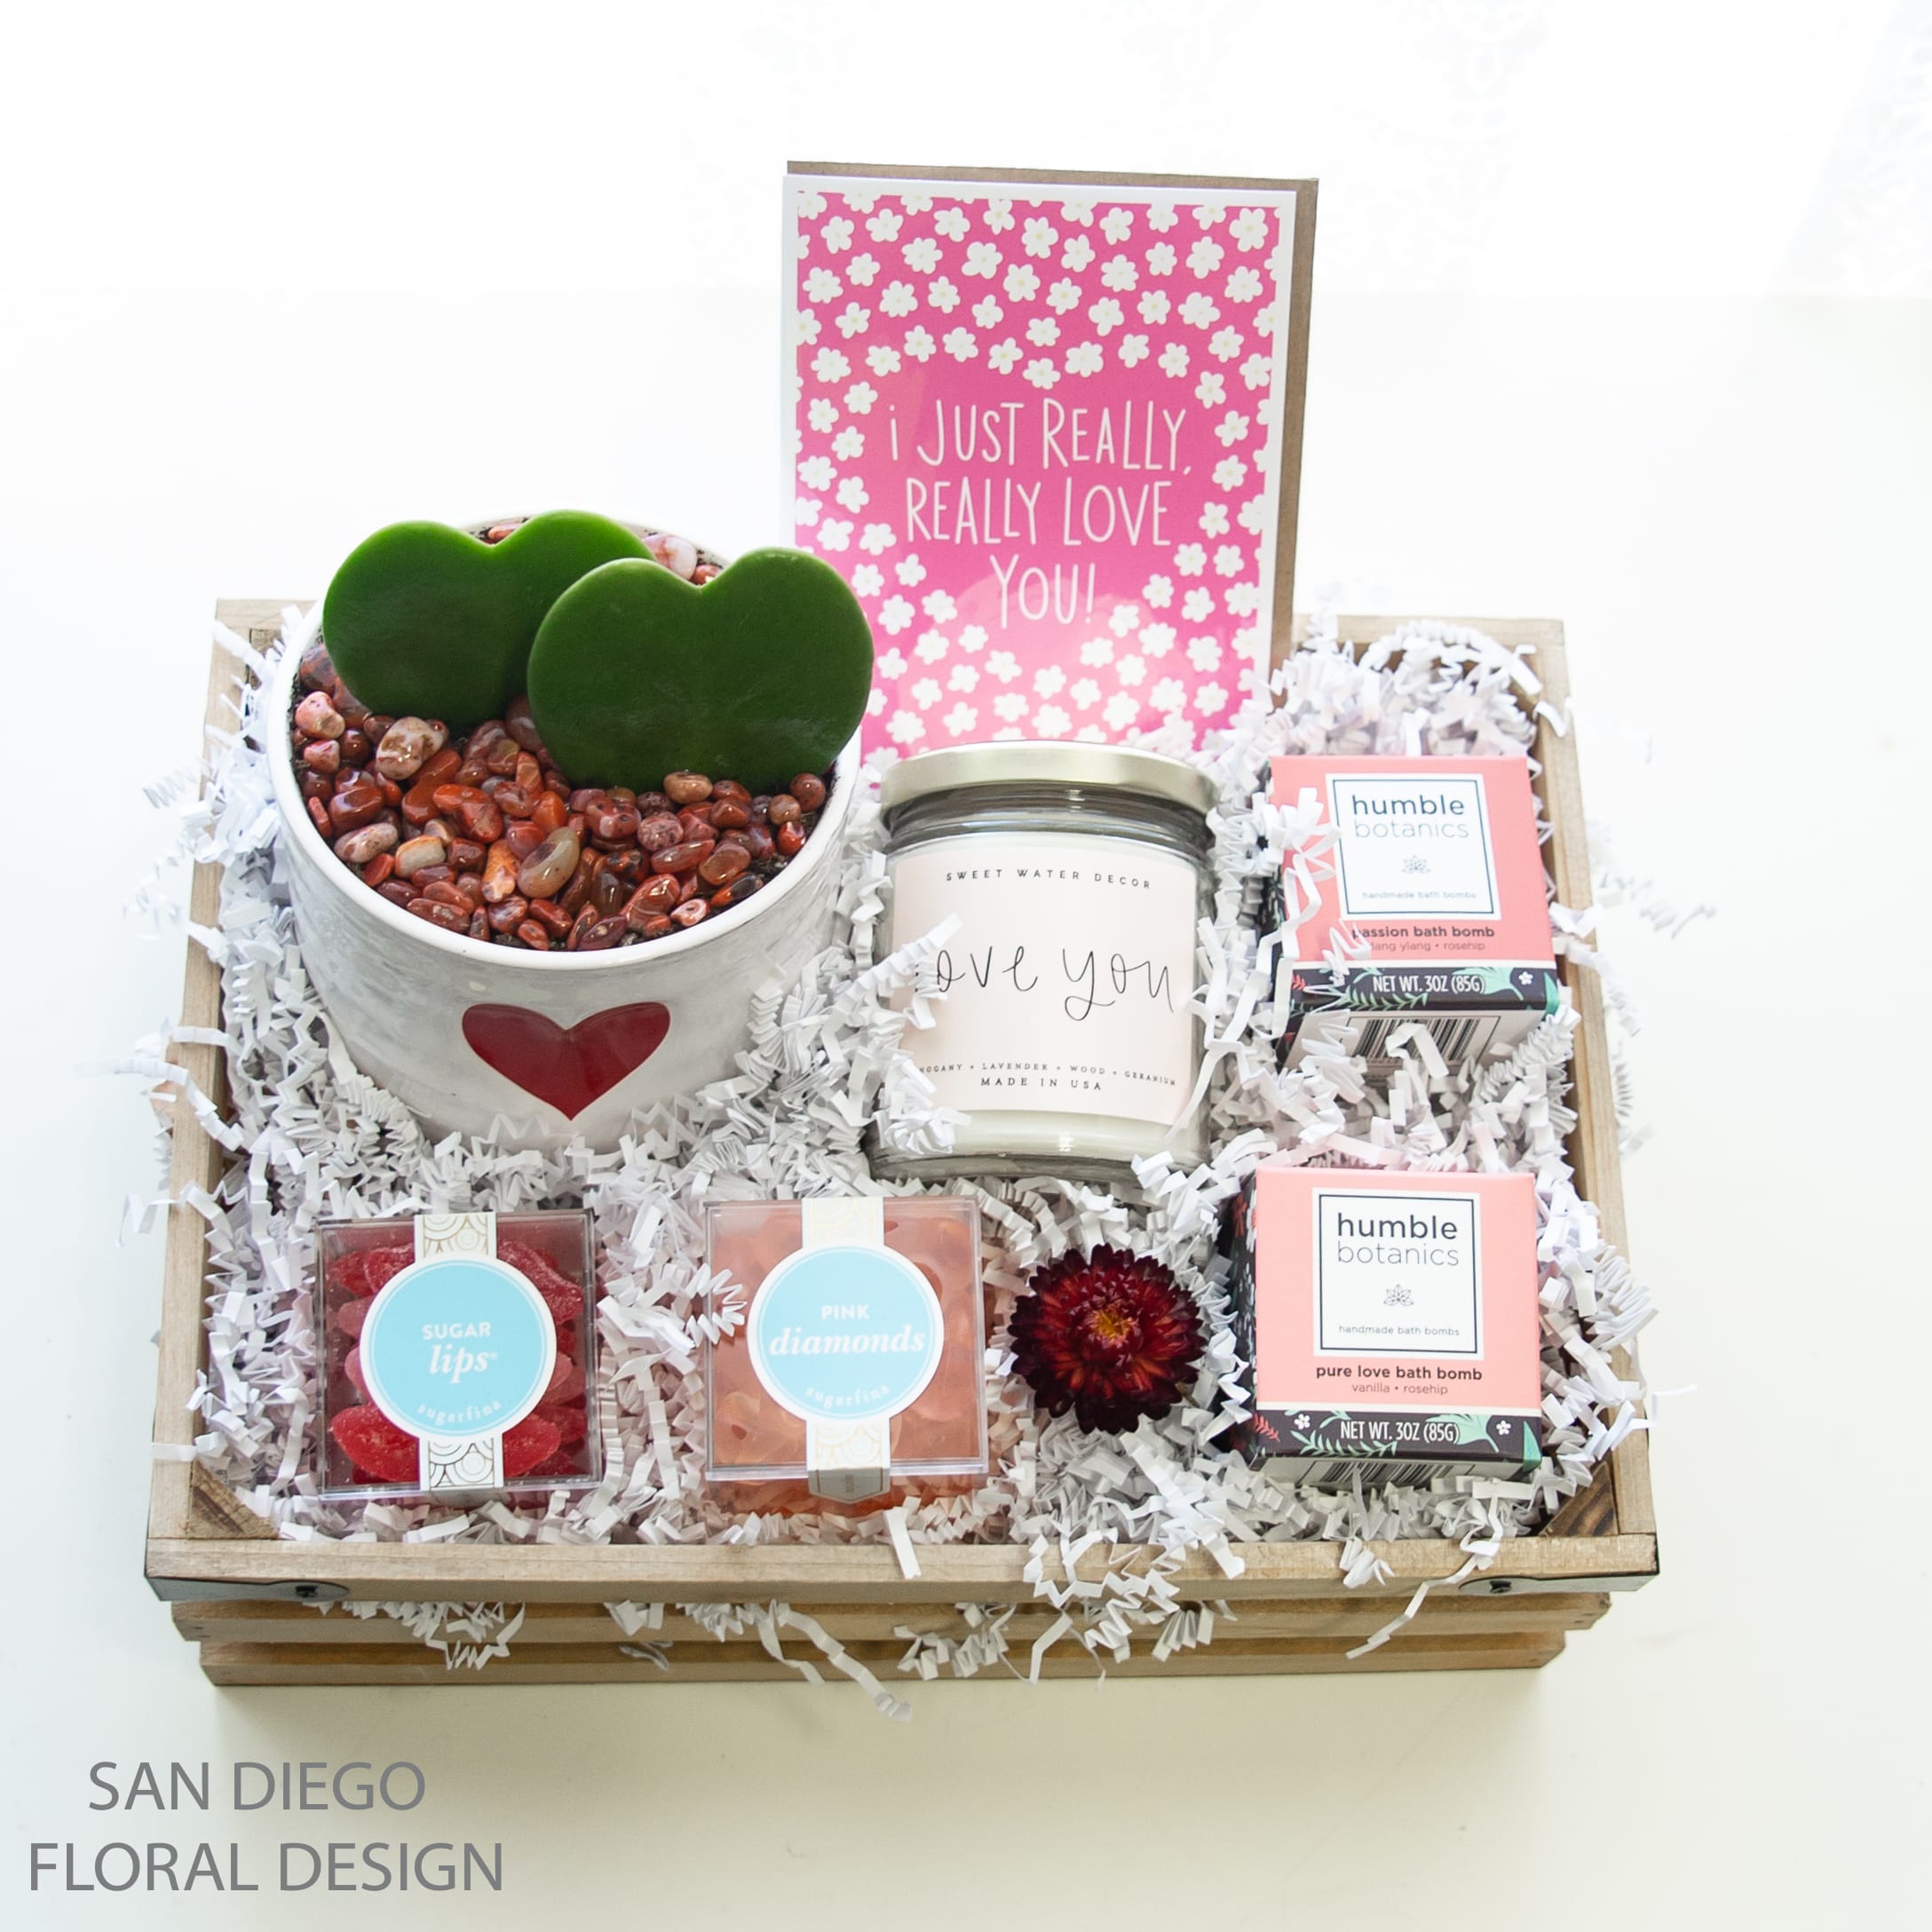 Two Of Hearts Gift Crate  - two sweetheart hoys succulents planted in a heart planter, an &quot;I Love You&quot; soy wax candle, two organic bath bombs &quot; Pure Love &quot; and &quot;Passion&quot; , two candy boxes by Sugarfina &quot; Hot Lips&quot; and &quot;Pink Diamonds&quot; and a Valentine's Day card 